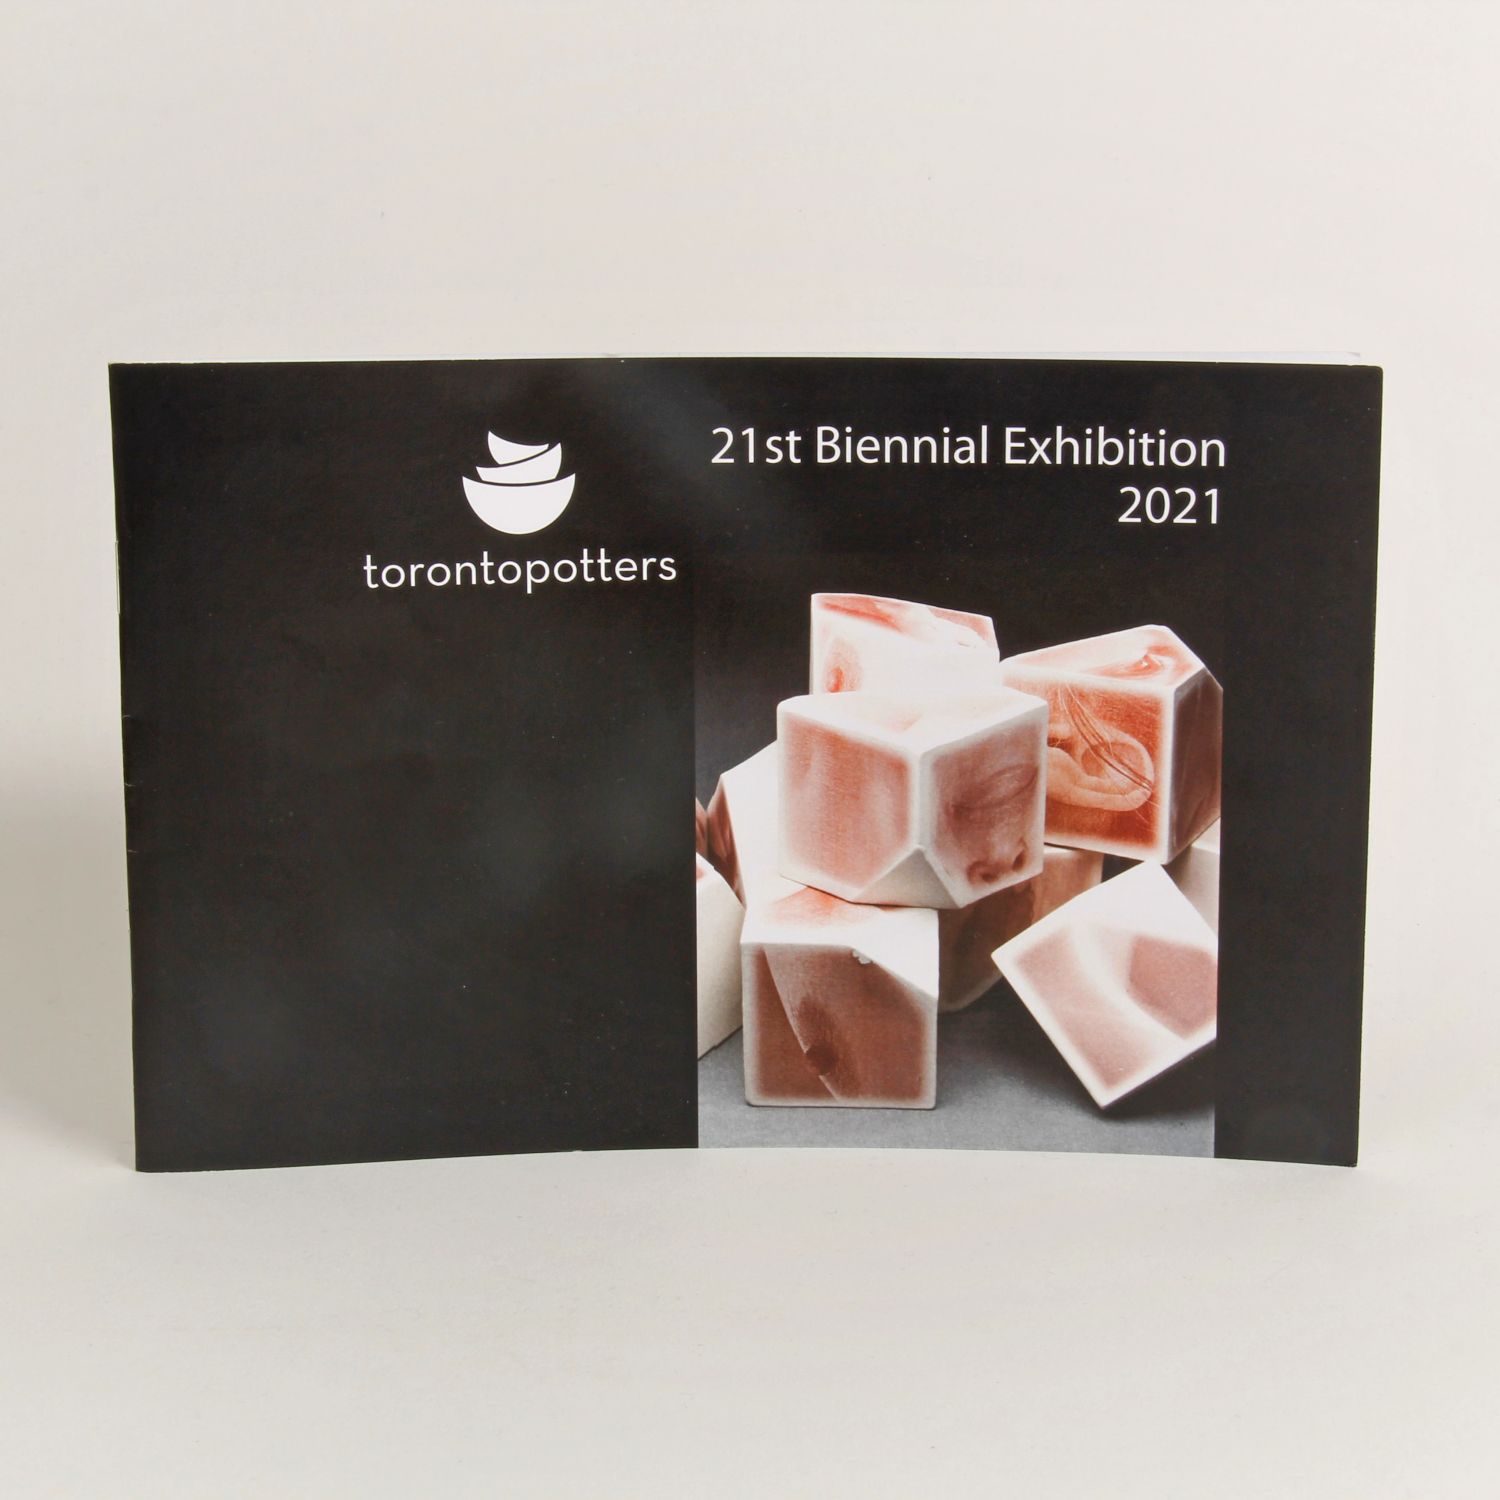 21 st Biennial Exhibition: Toronto Potters Catalogue Product Image 1 of 6